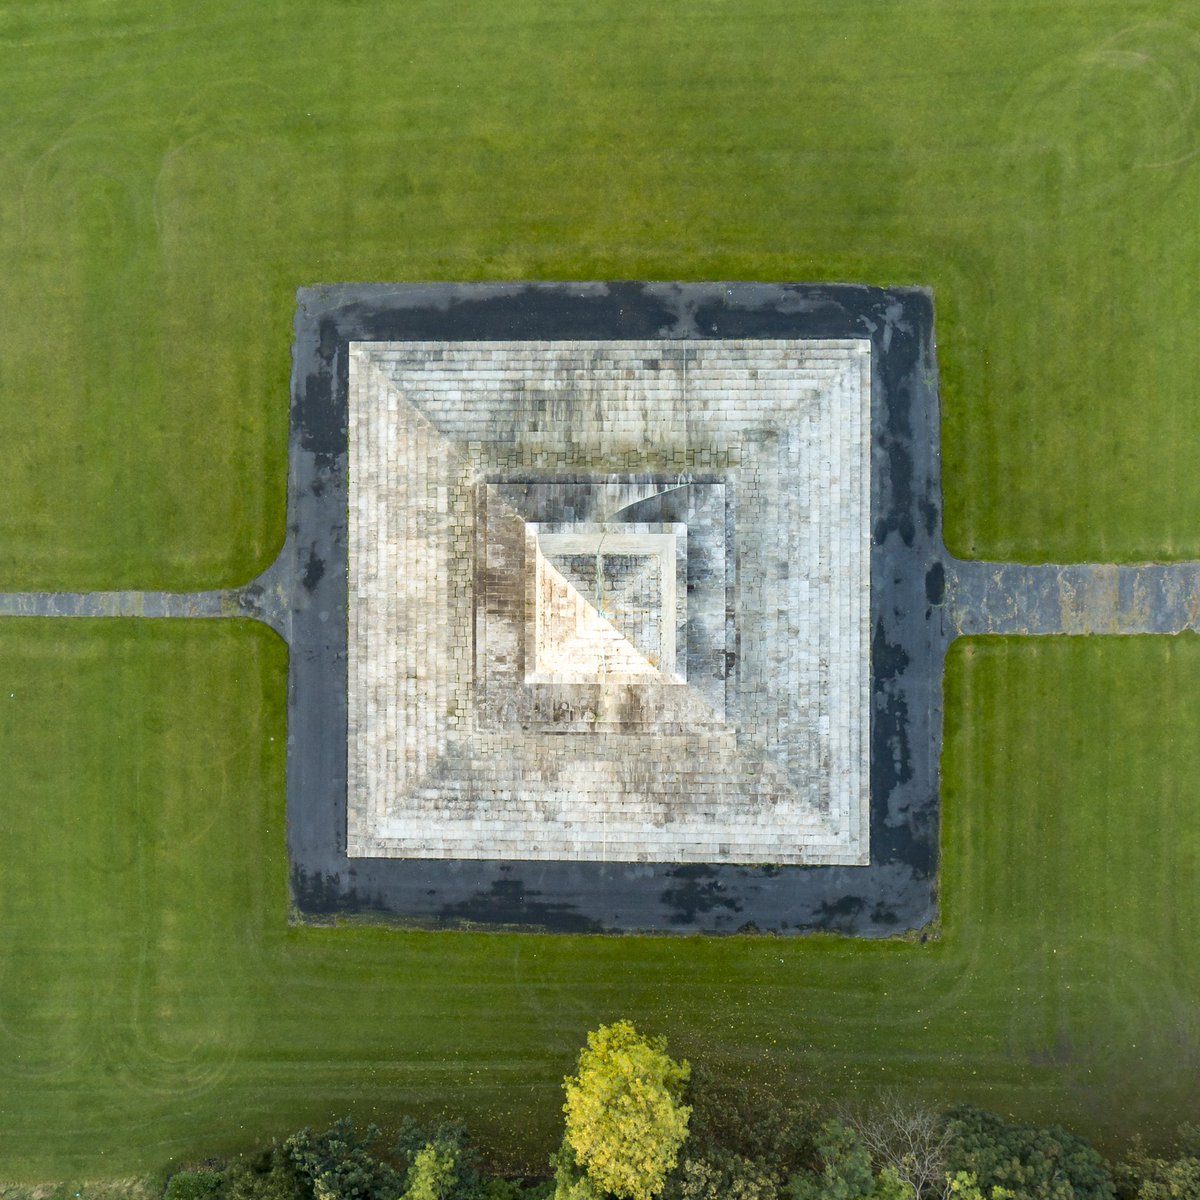 Wellington Monument, Phoenix Park. Originally planned for Merrion Square! 

We have a blog, discussing how we got permission to fly at the Phoenix Park, which even included a visit to our office, from the @GardaTraffic! Worth a read.. aerial.ie/blog/phoenix-p… #dublin #phoenixPark